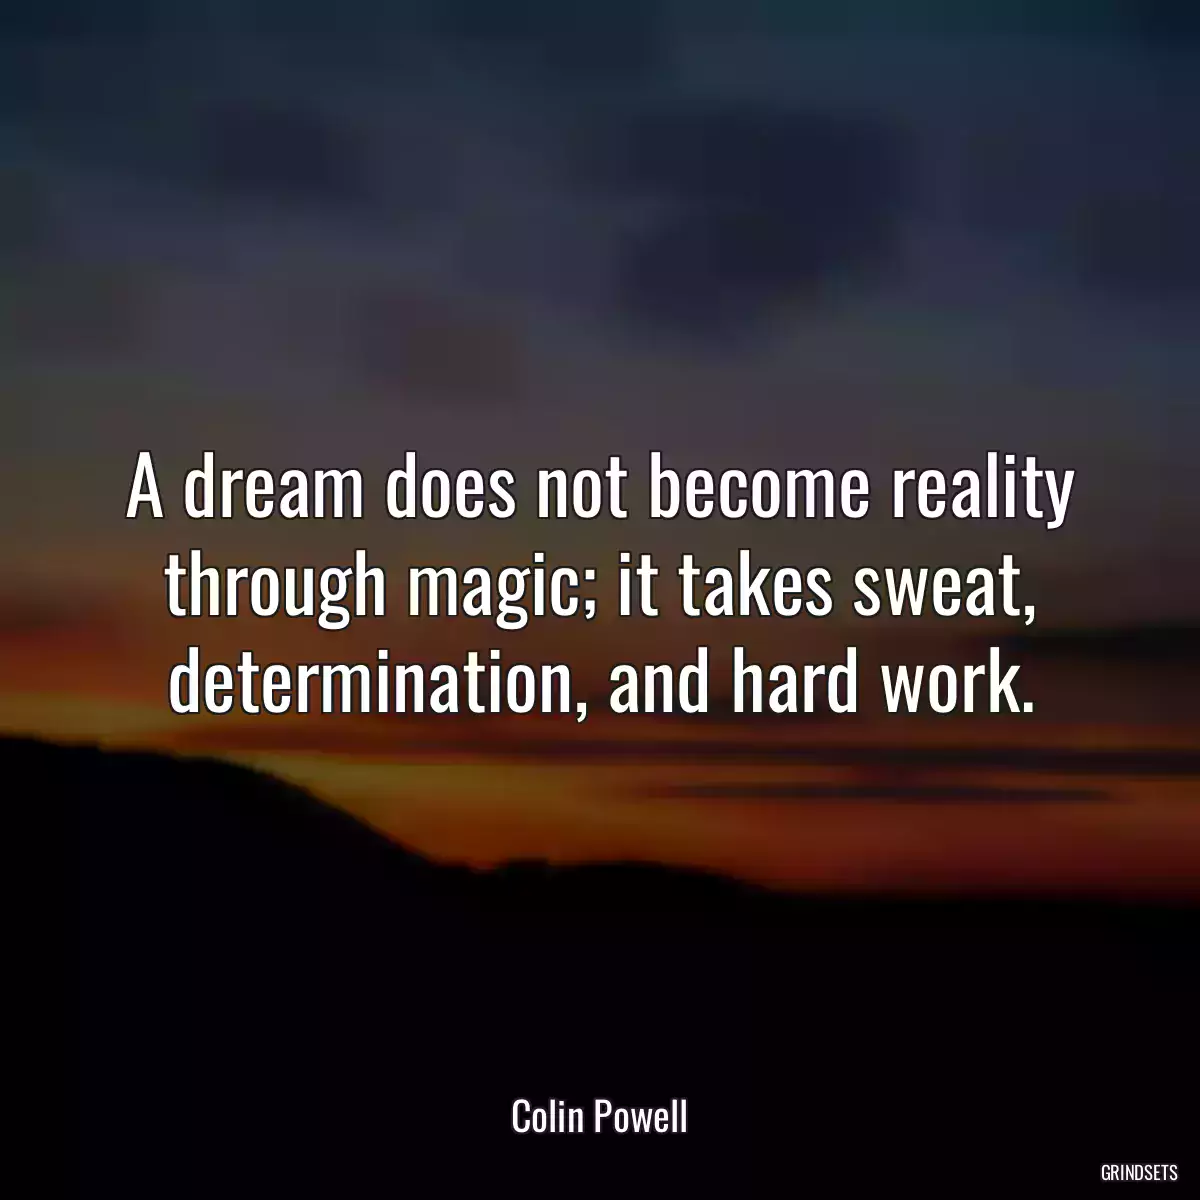 A dream does not become reality through magic; it takes sweat, determination, and hard work.